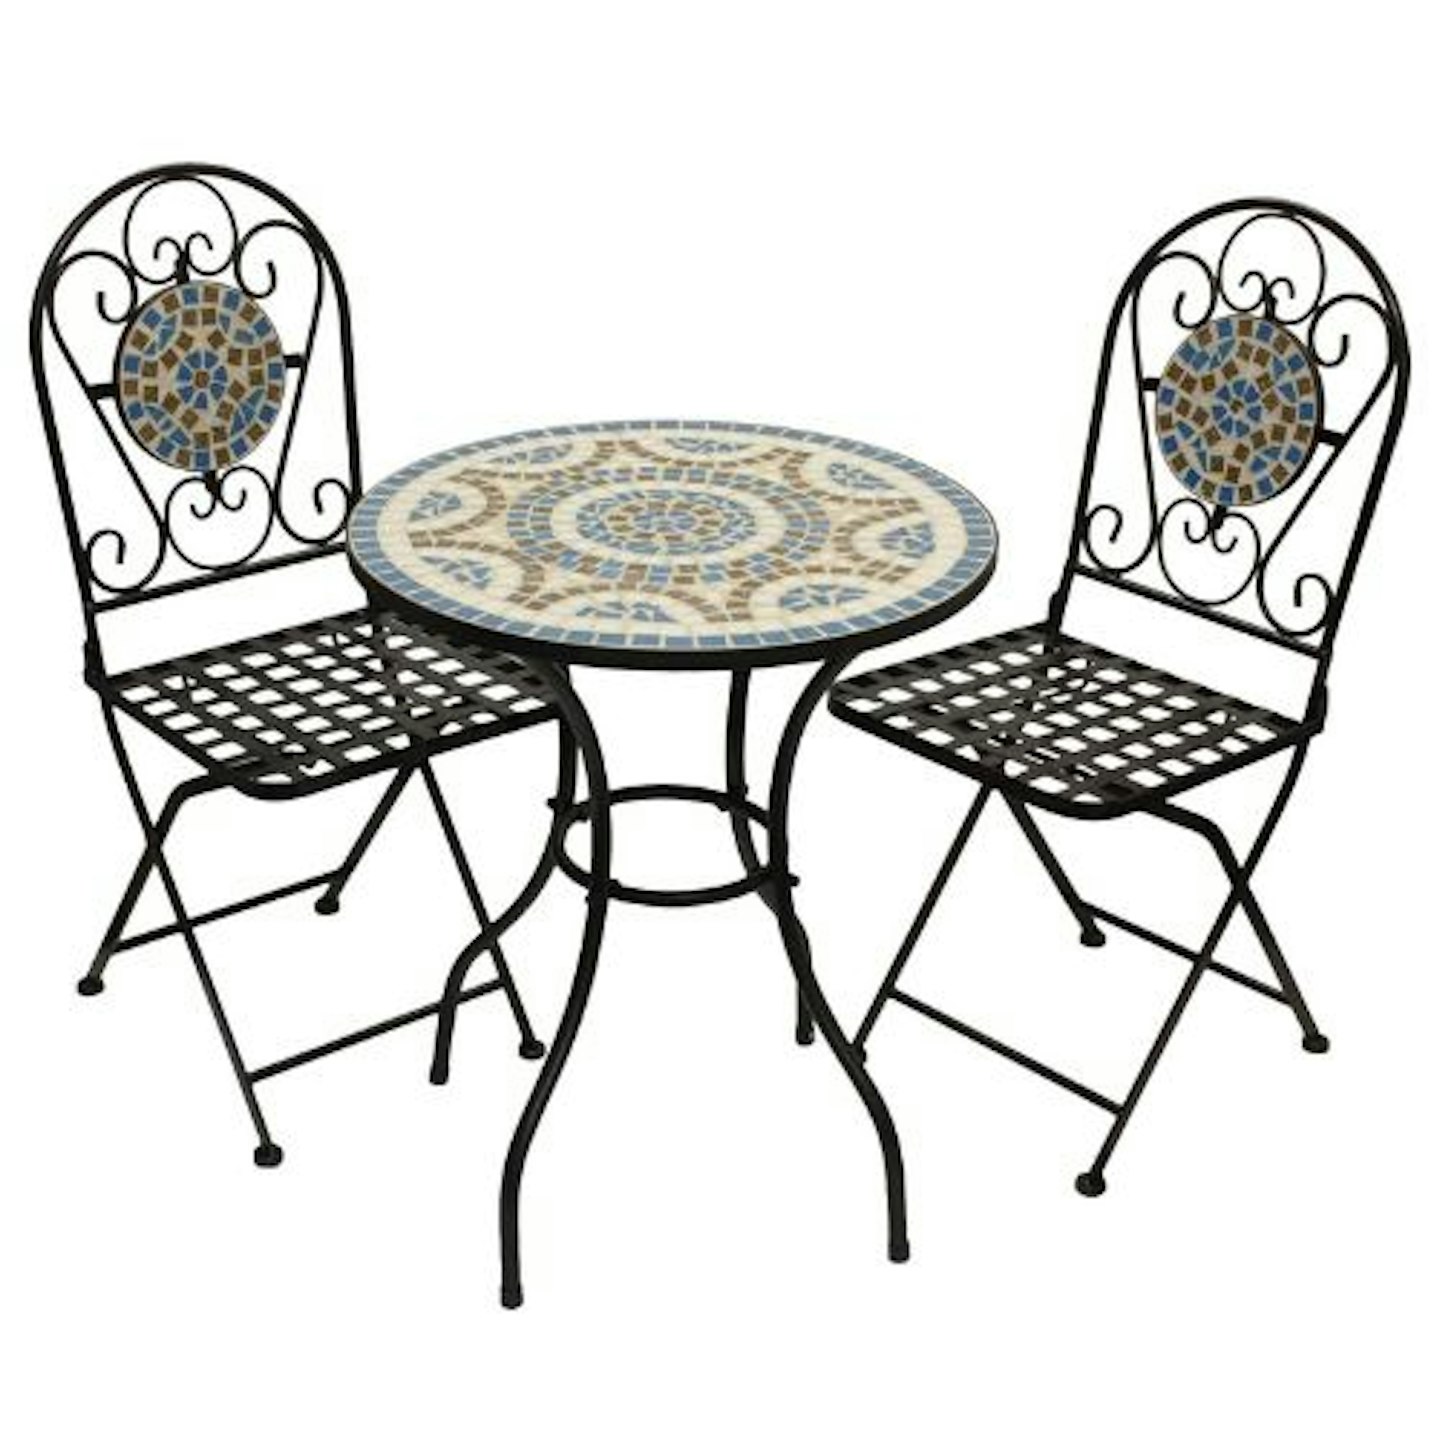 Woodside Blue Mosaic Garden Table And Folding Chair Set